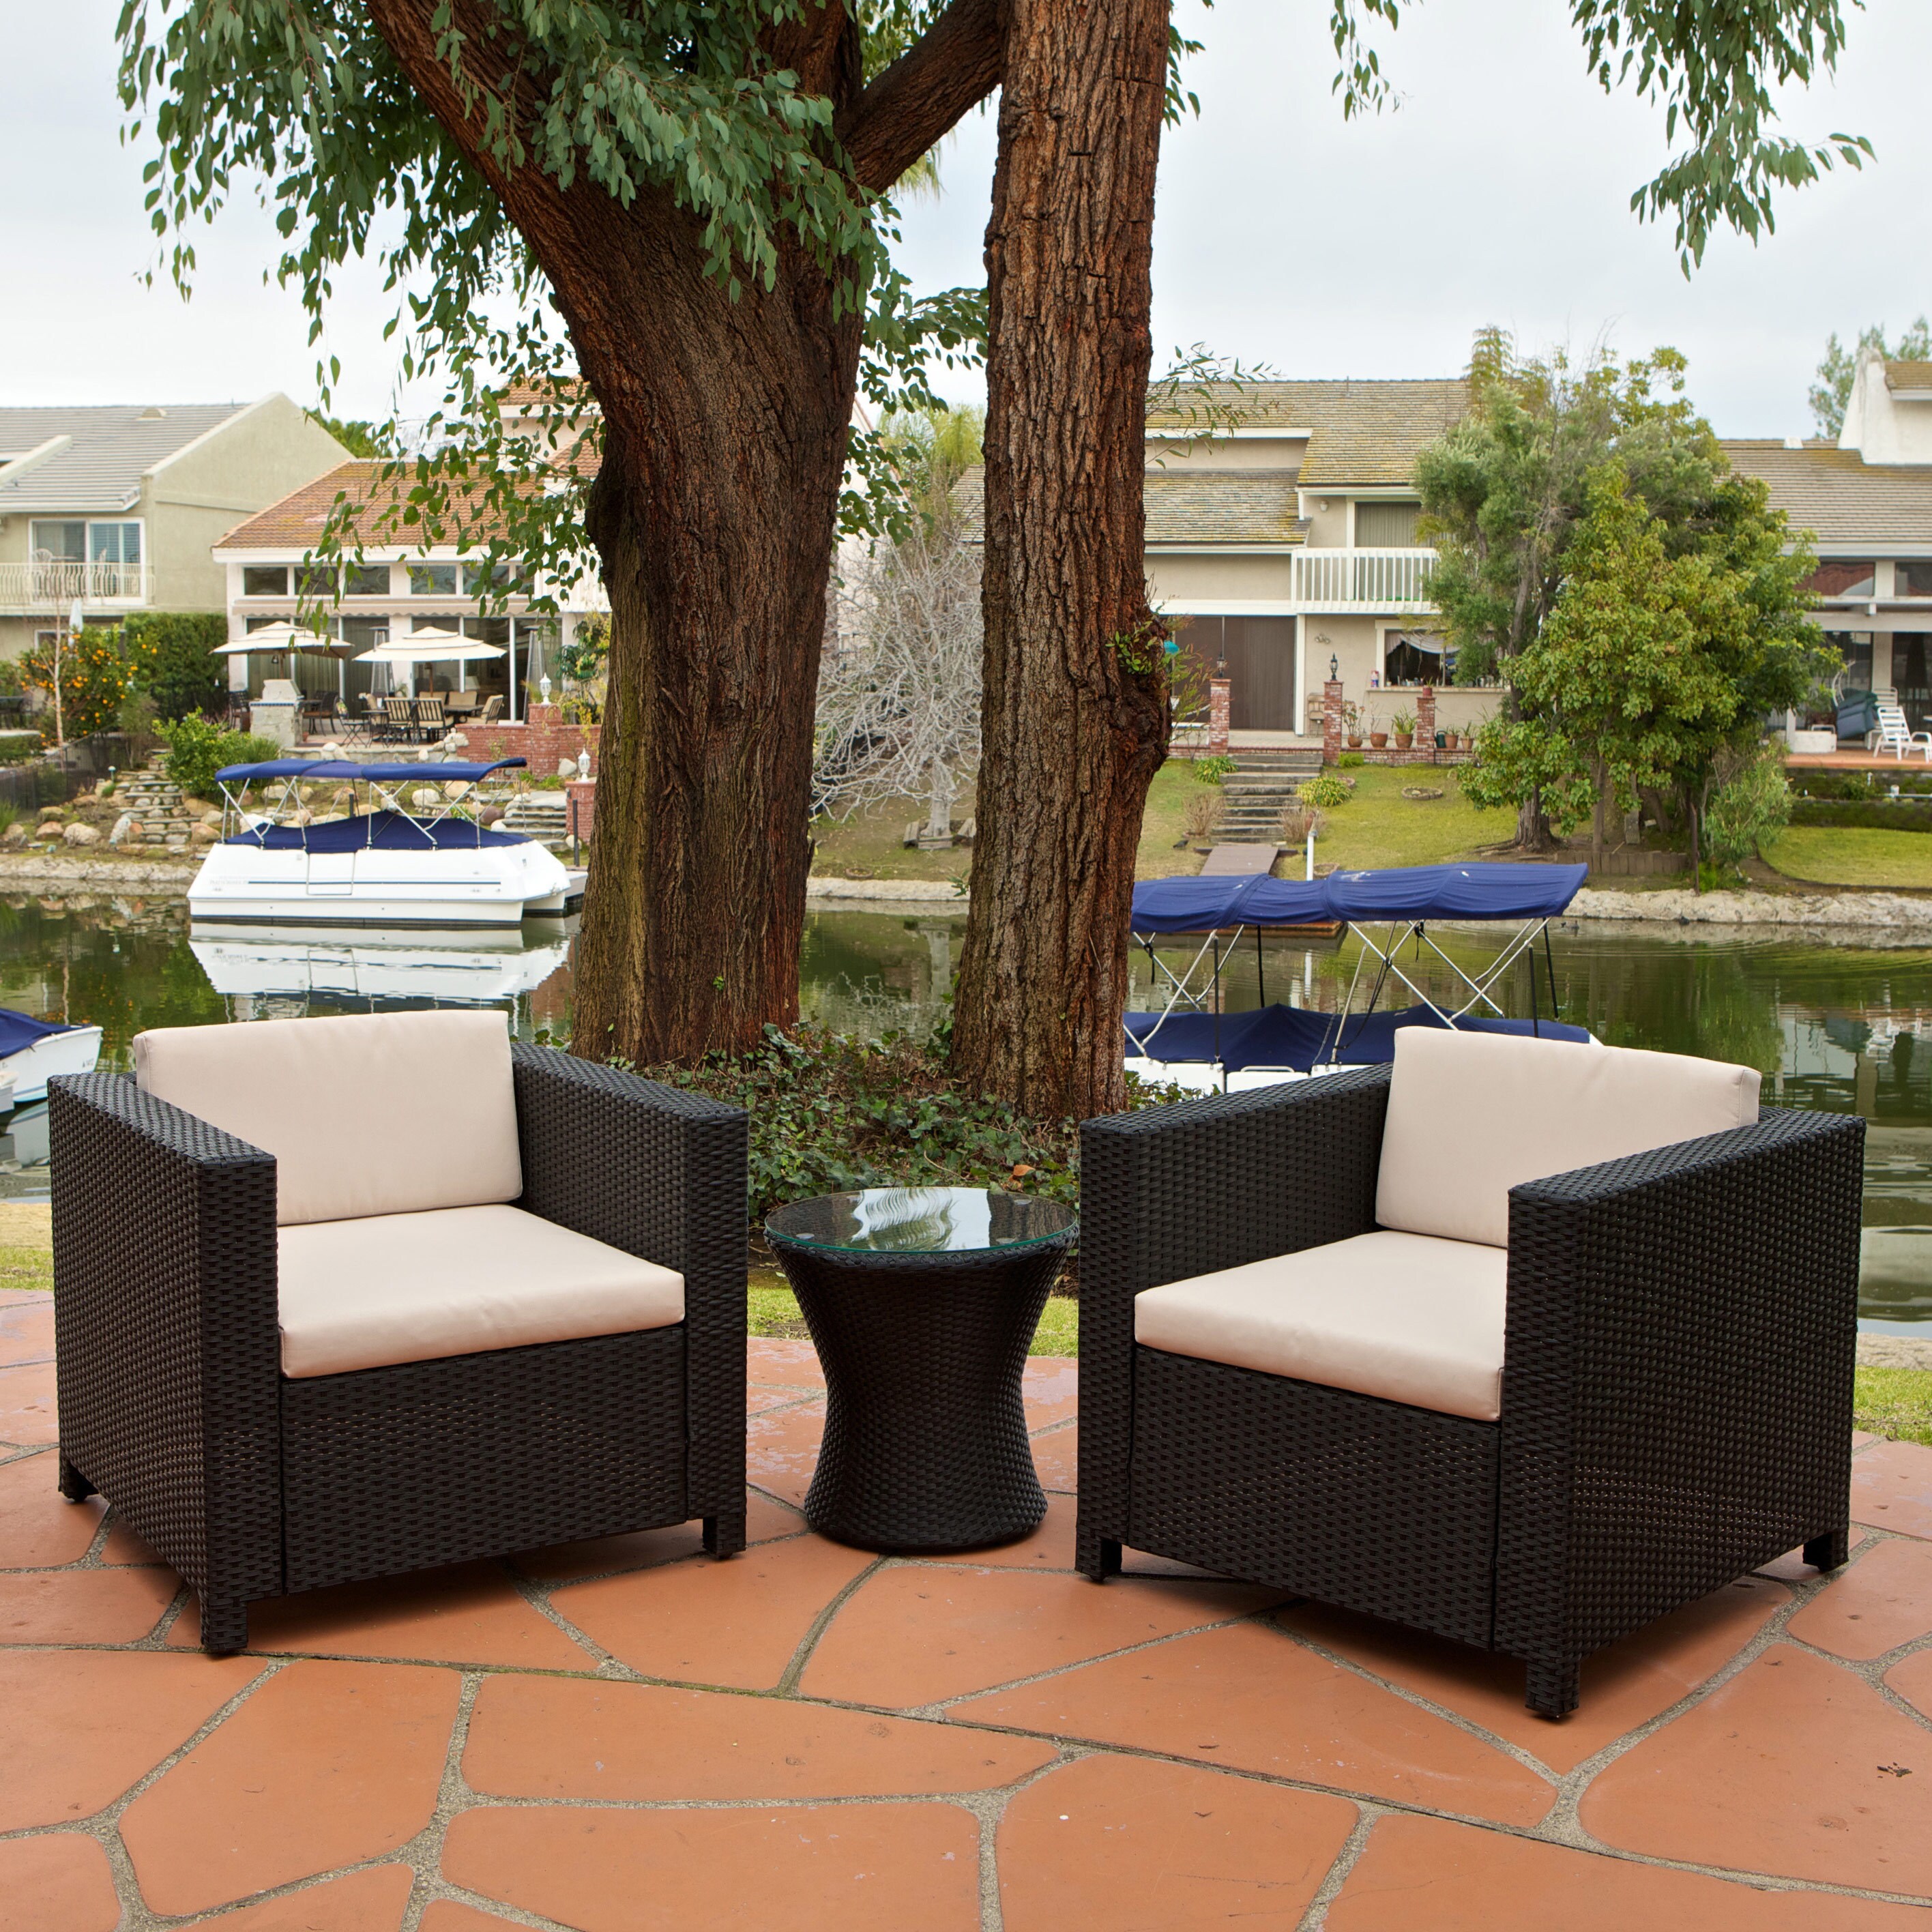 Bahamas Outdoor Club Chairs with Tan Cushions (Set of 2) Today $469